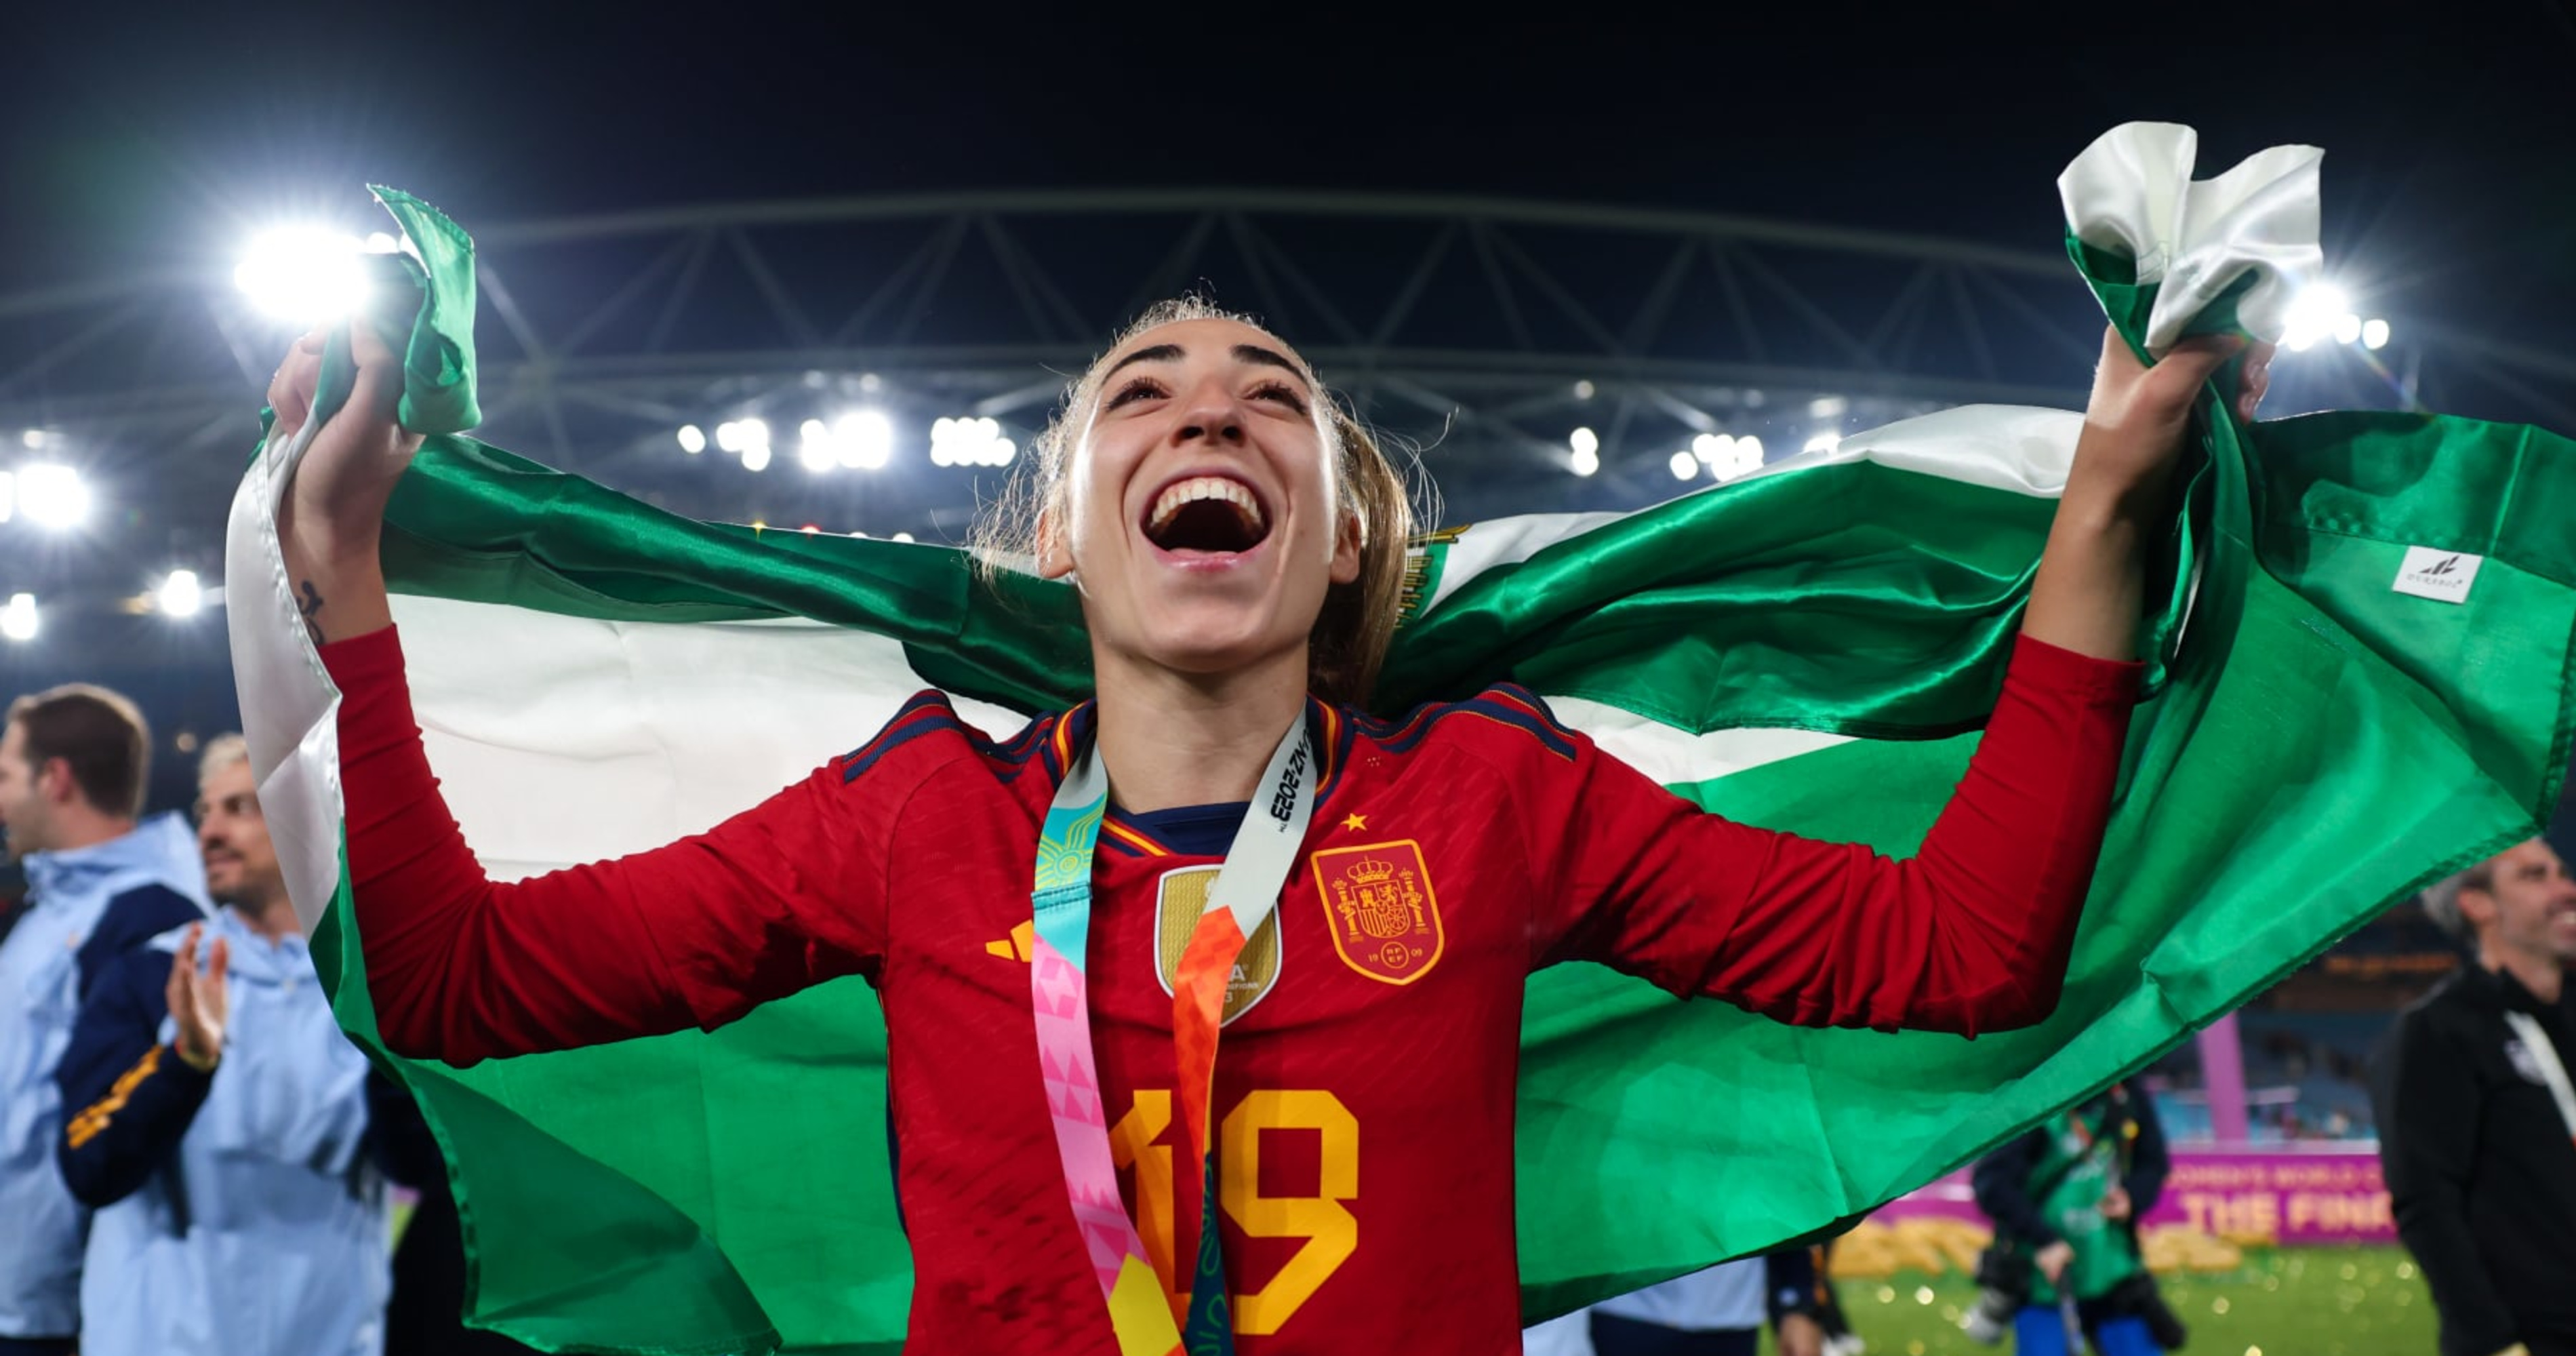 Olga Carmona Informed Her Father Has Died After Women's World Cup Final